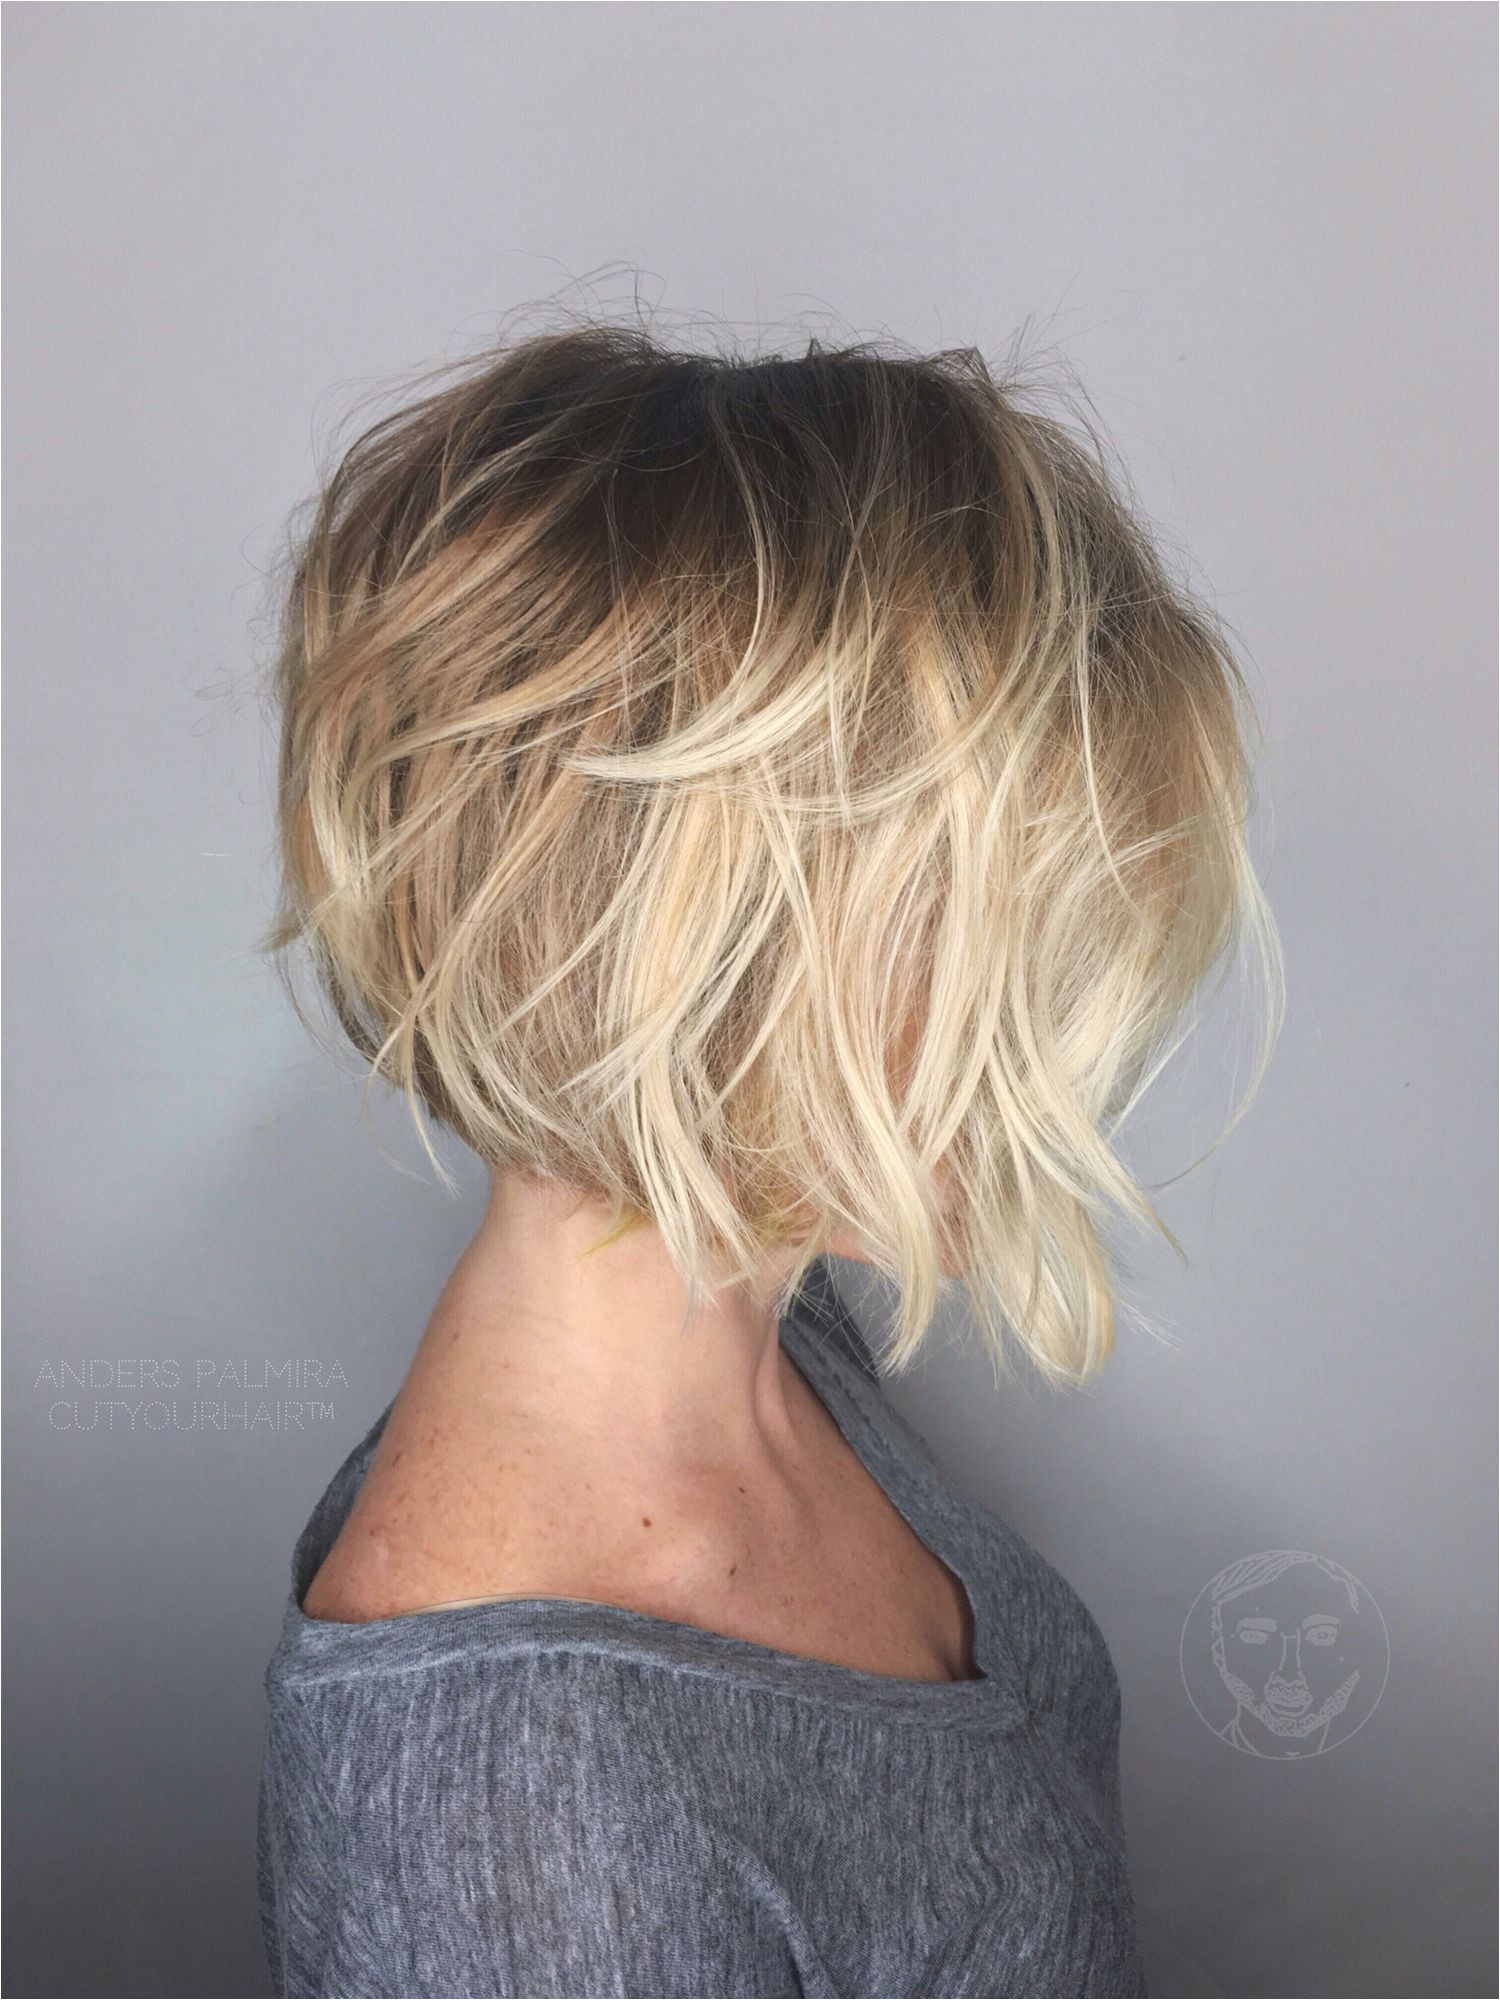 Permed Hair Inspirations Under Enchanting Medium Bob Hairstyle Awesome I Pinimg 1200x 0d 60 8a With